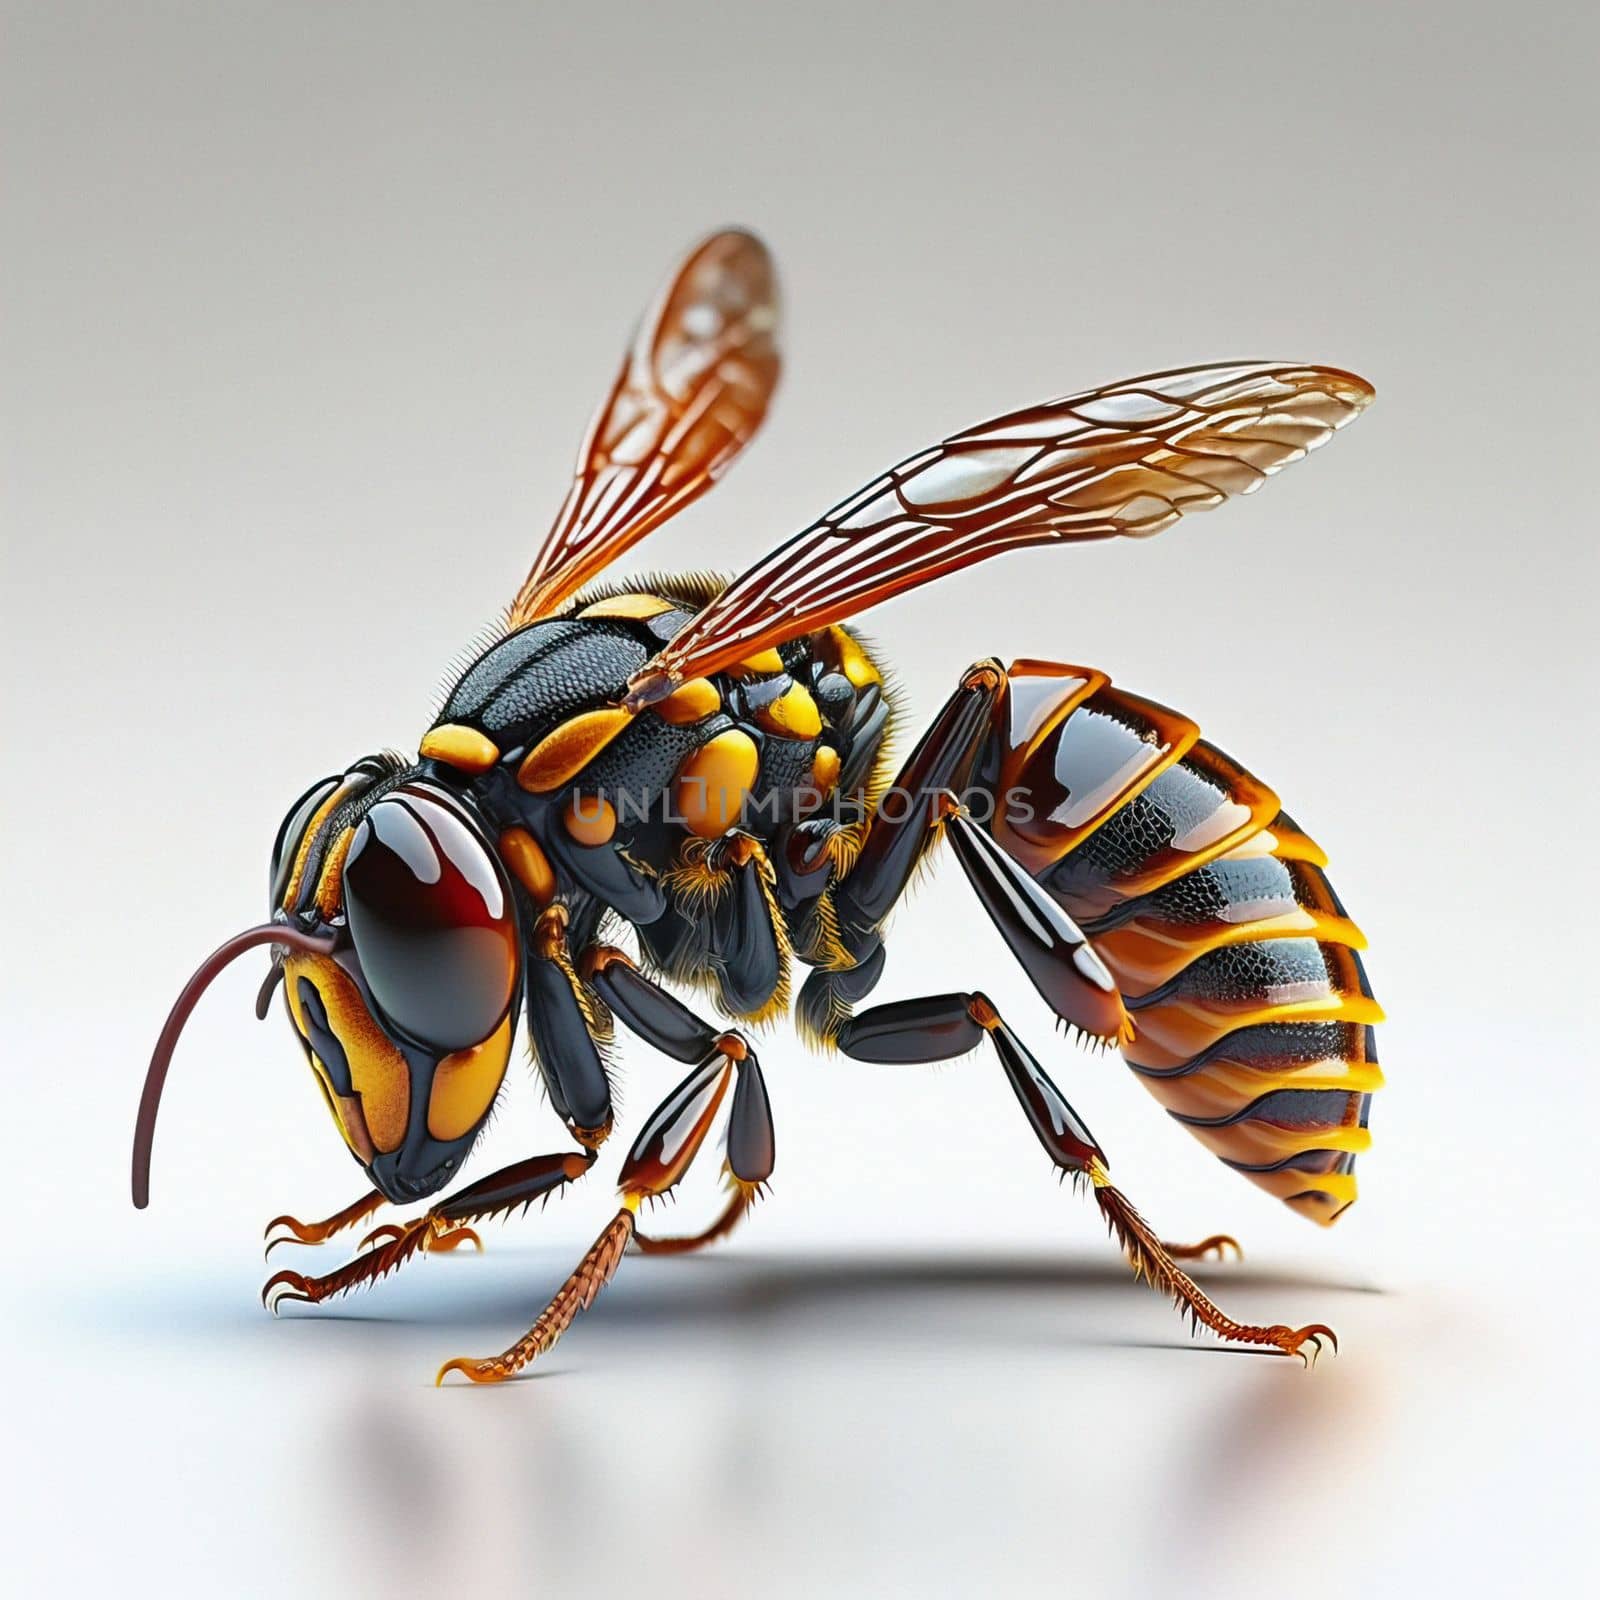 3d hornet render modelling images. Bee isolated on white background by igor010